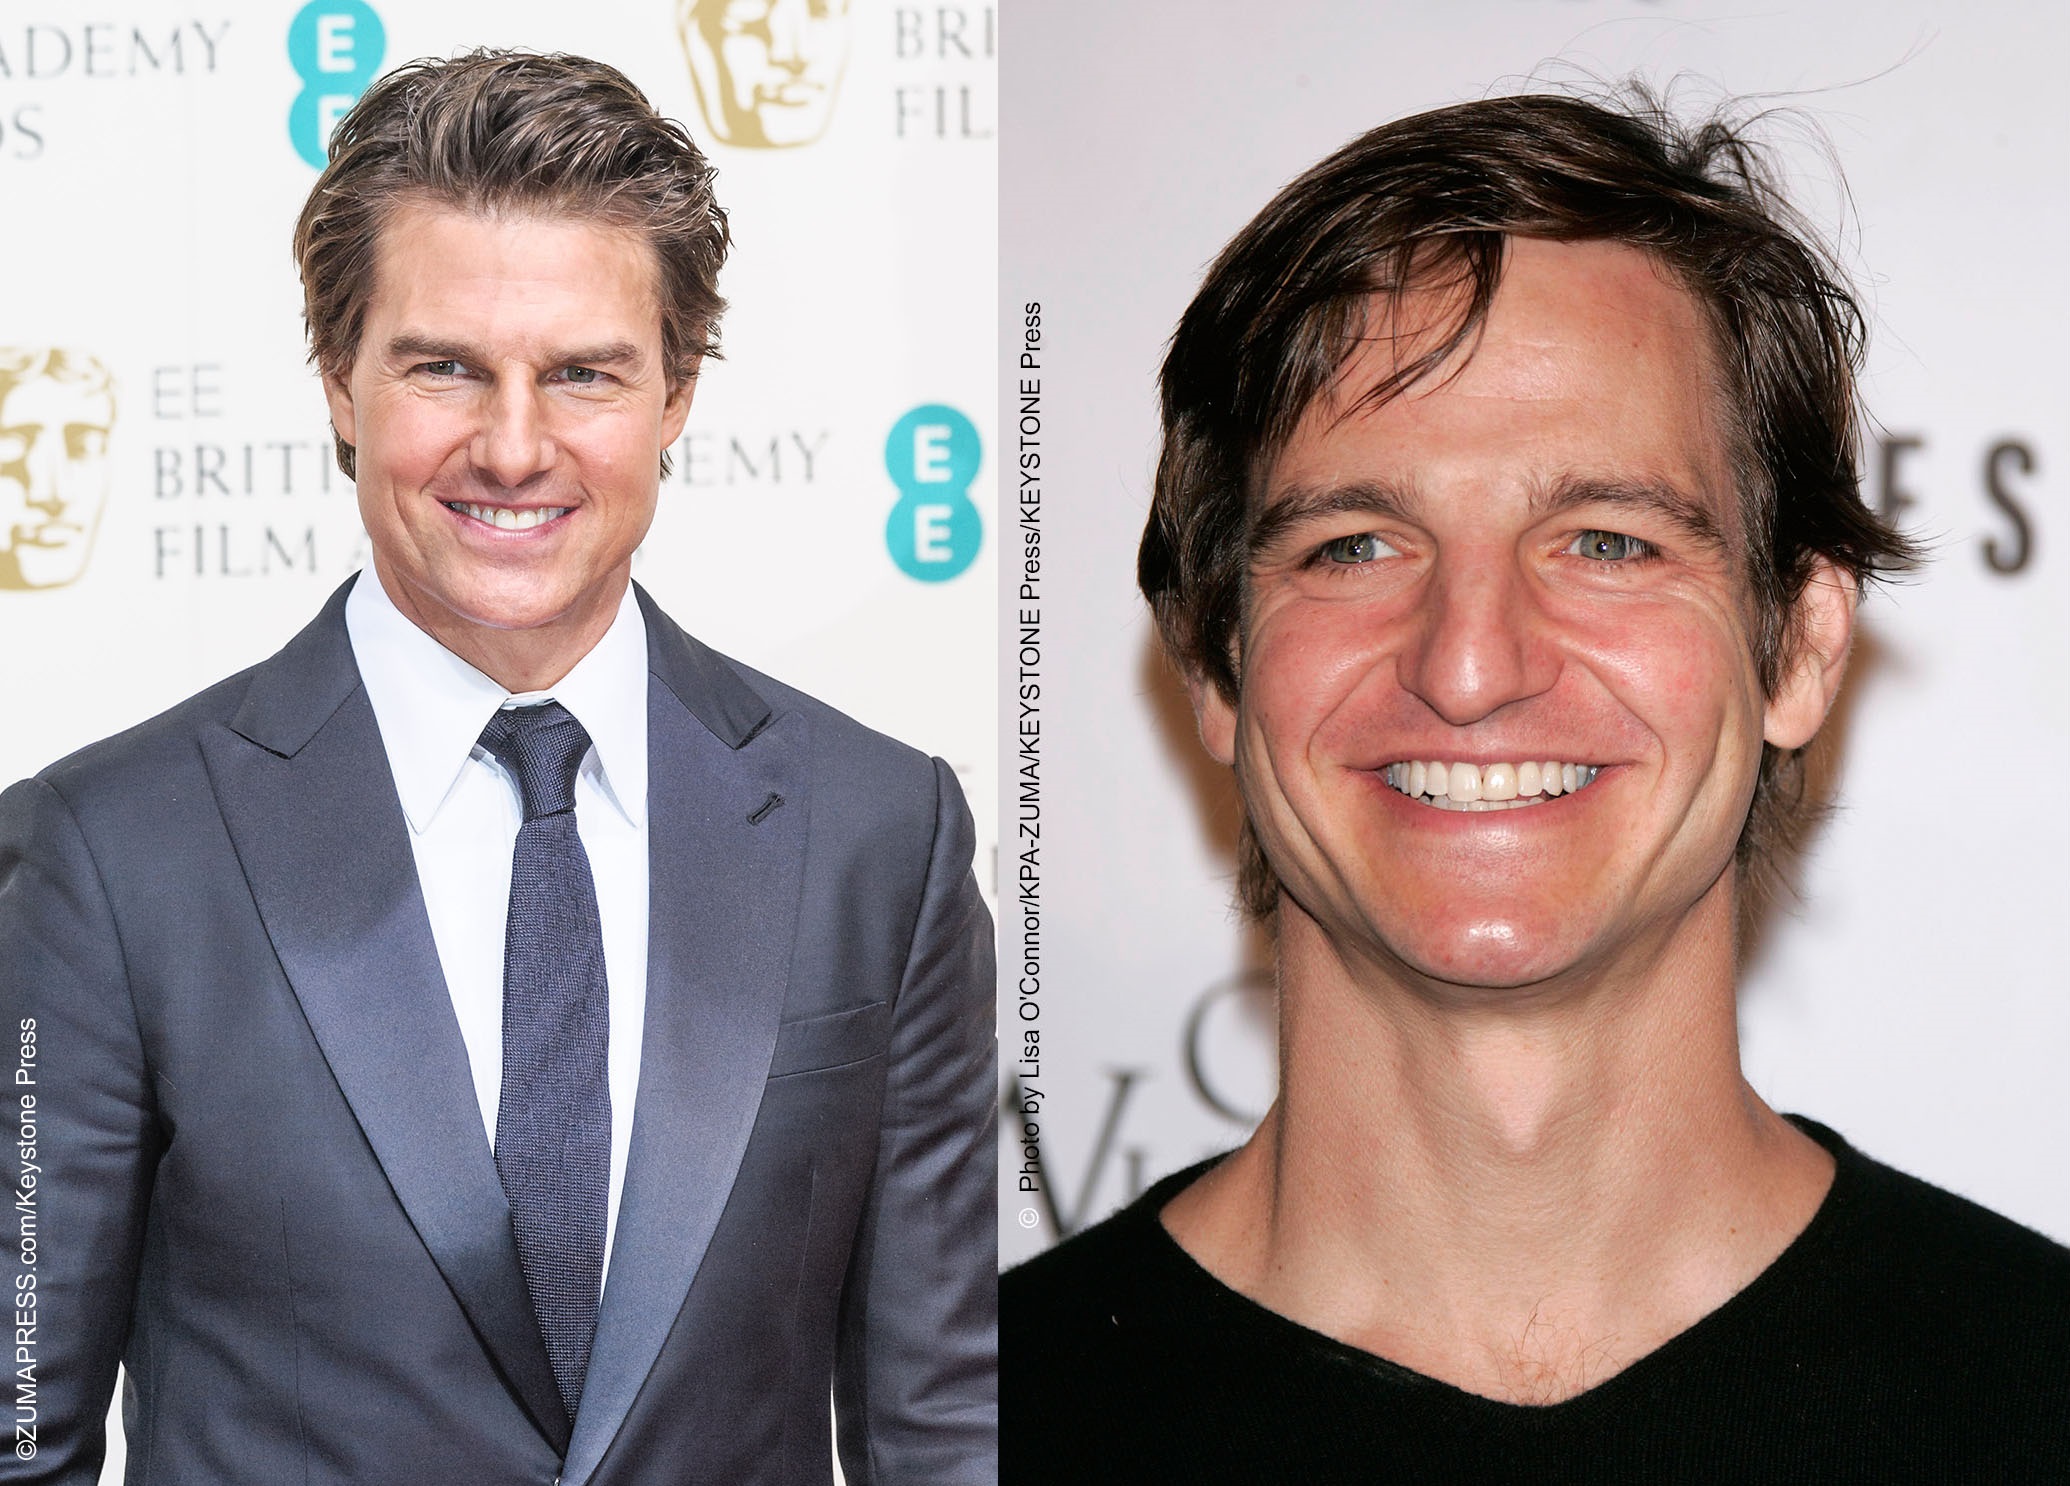 does tom cruise have a brother who is an actor